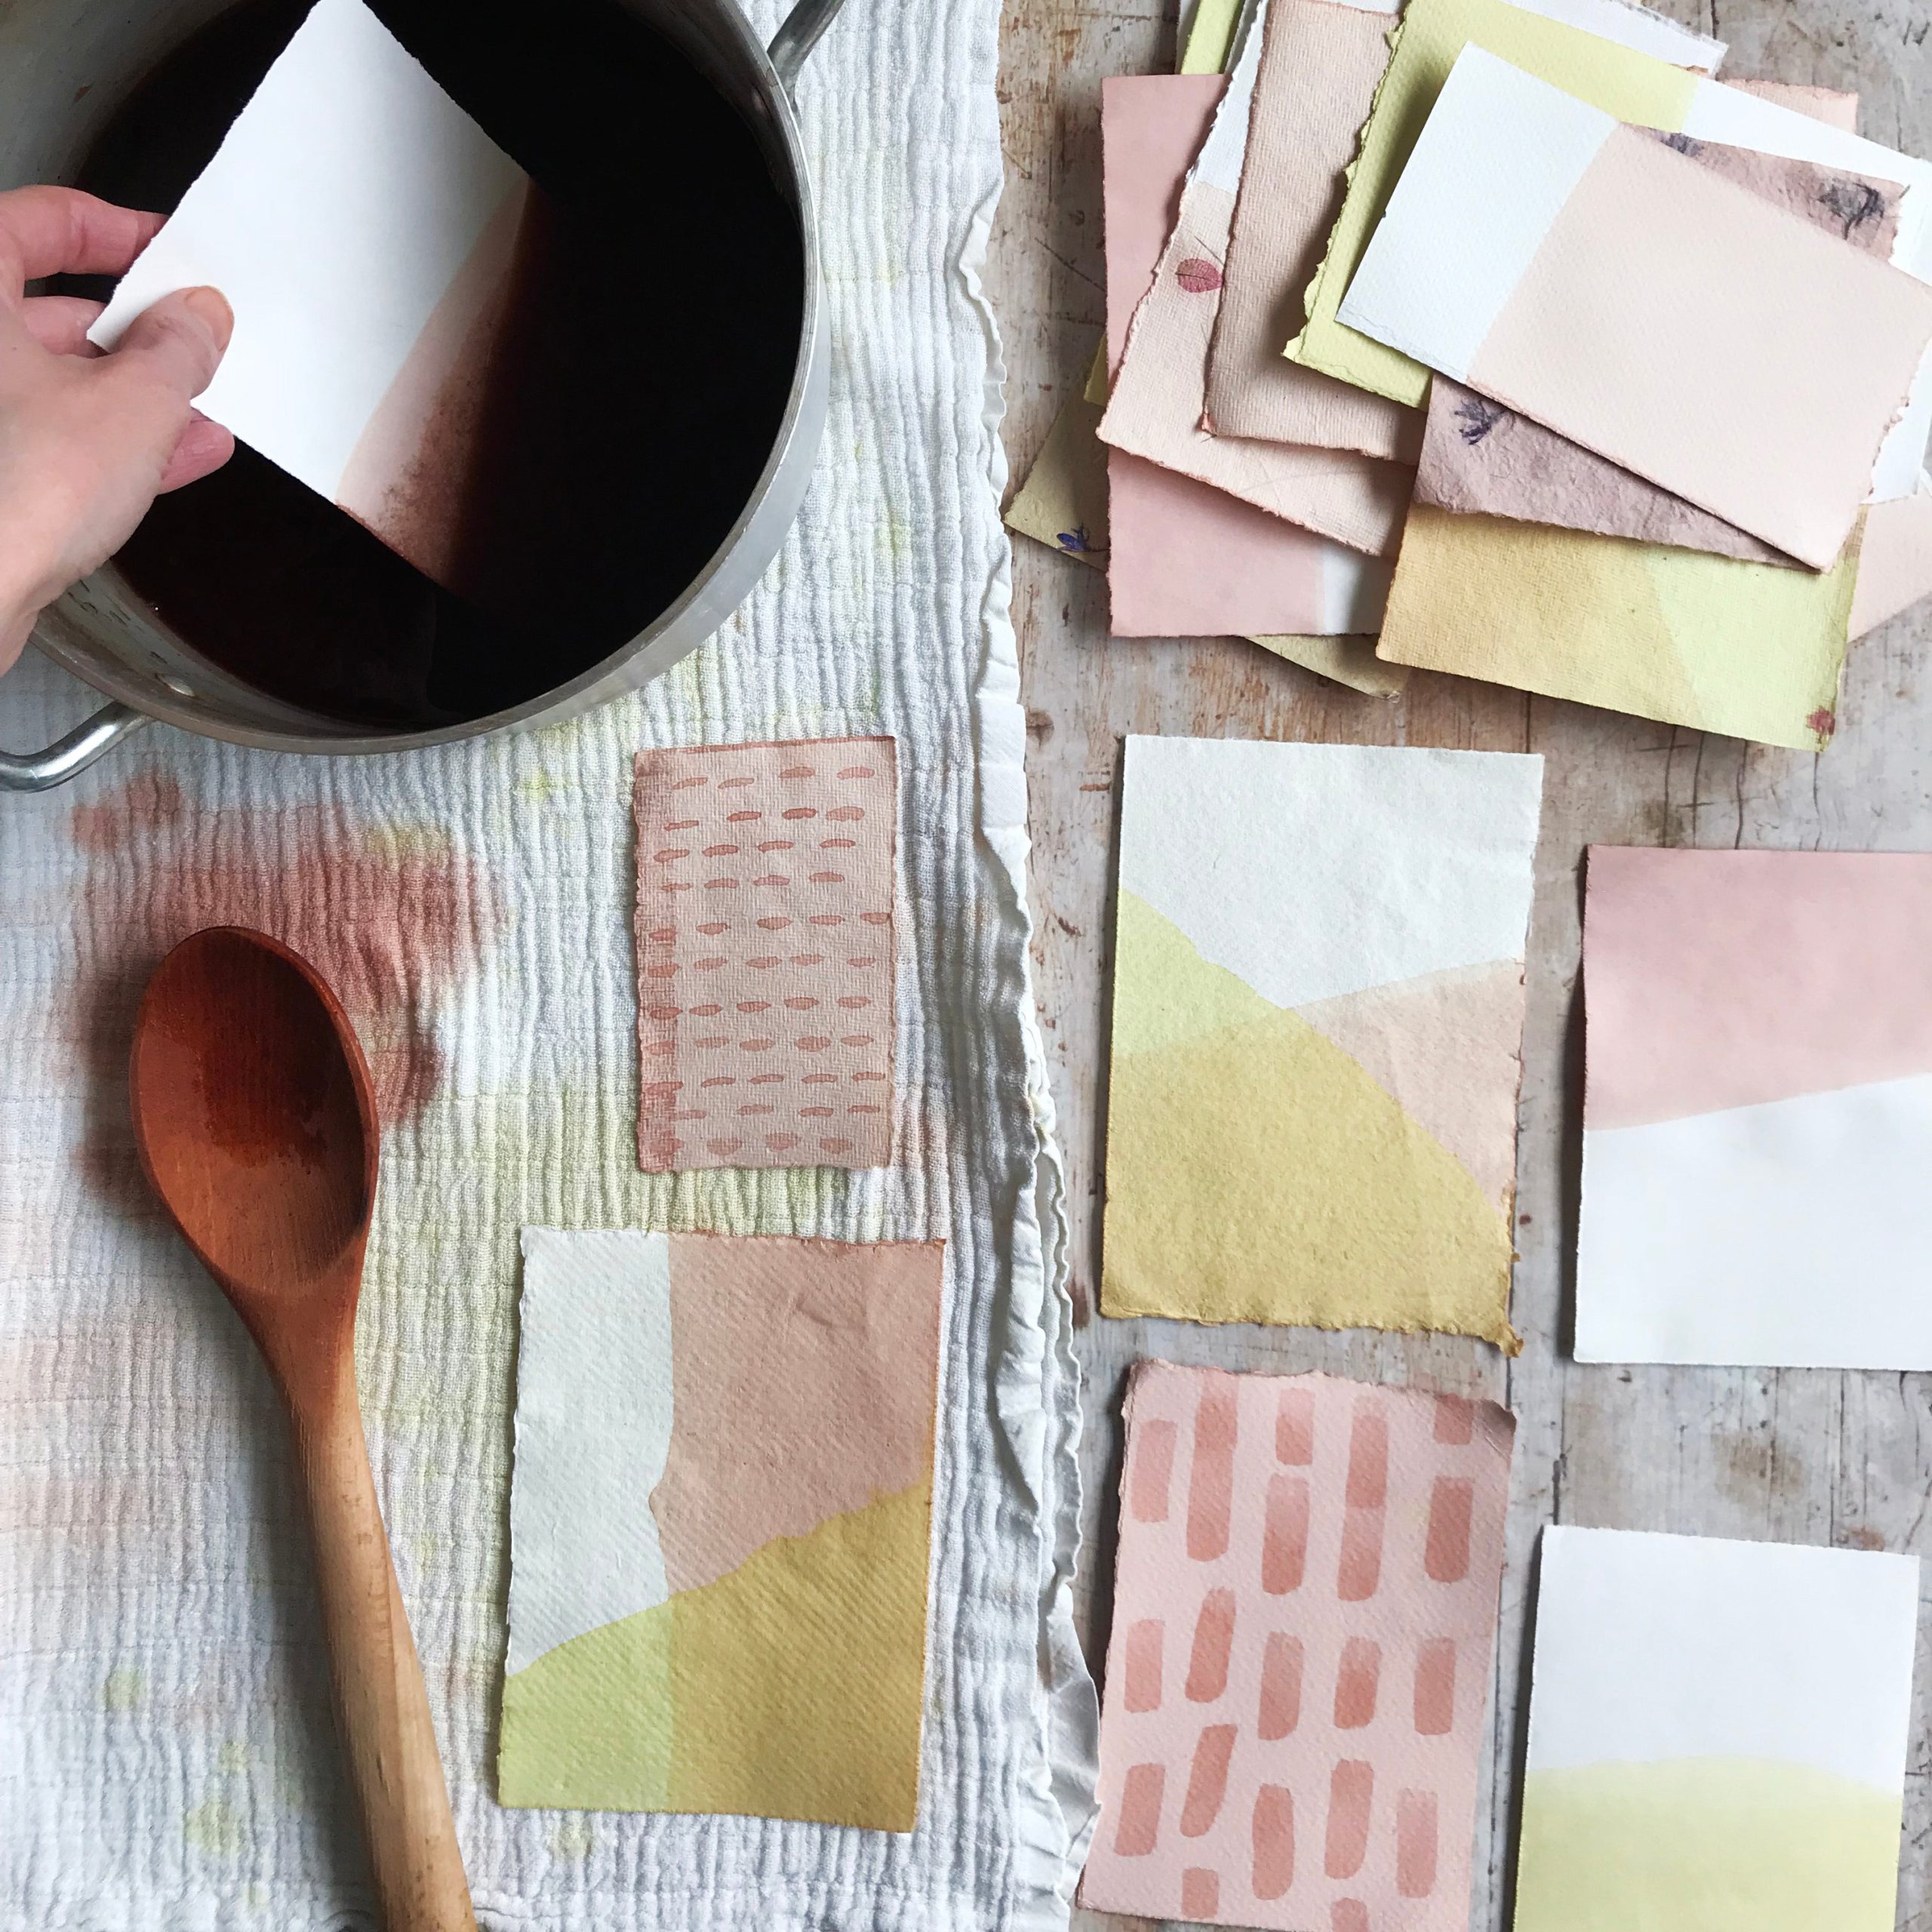 How to Make Homemade Paper